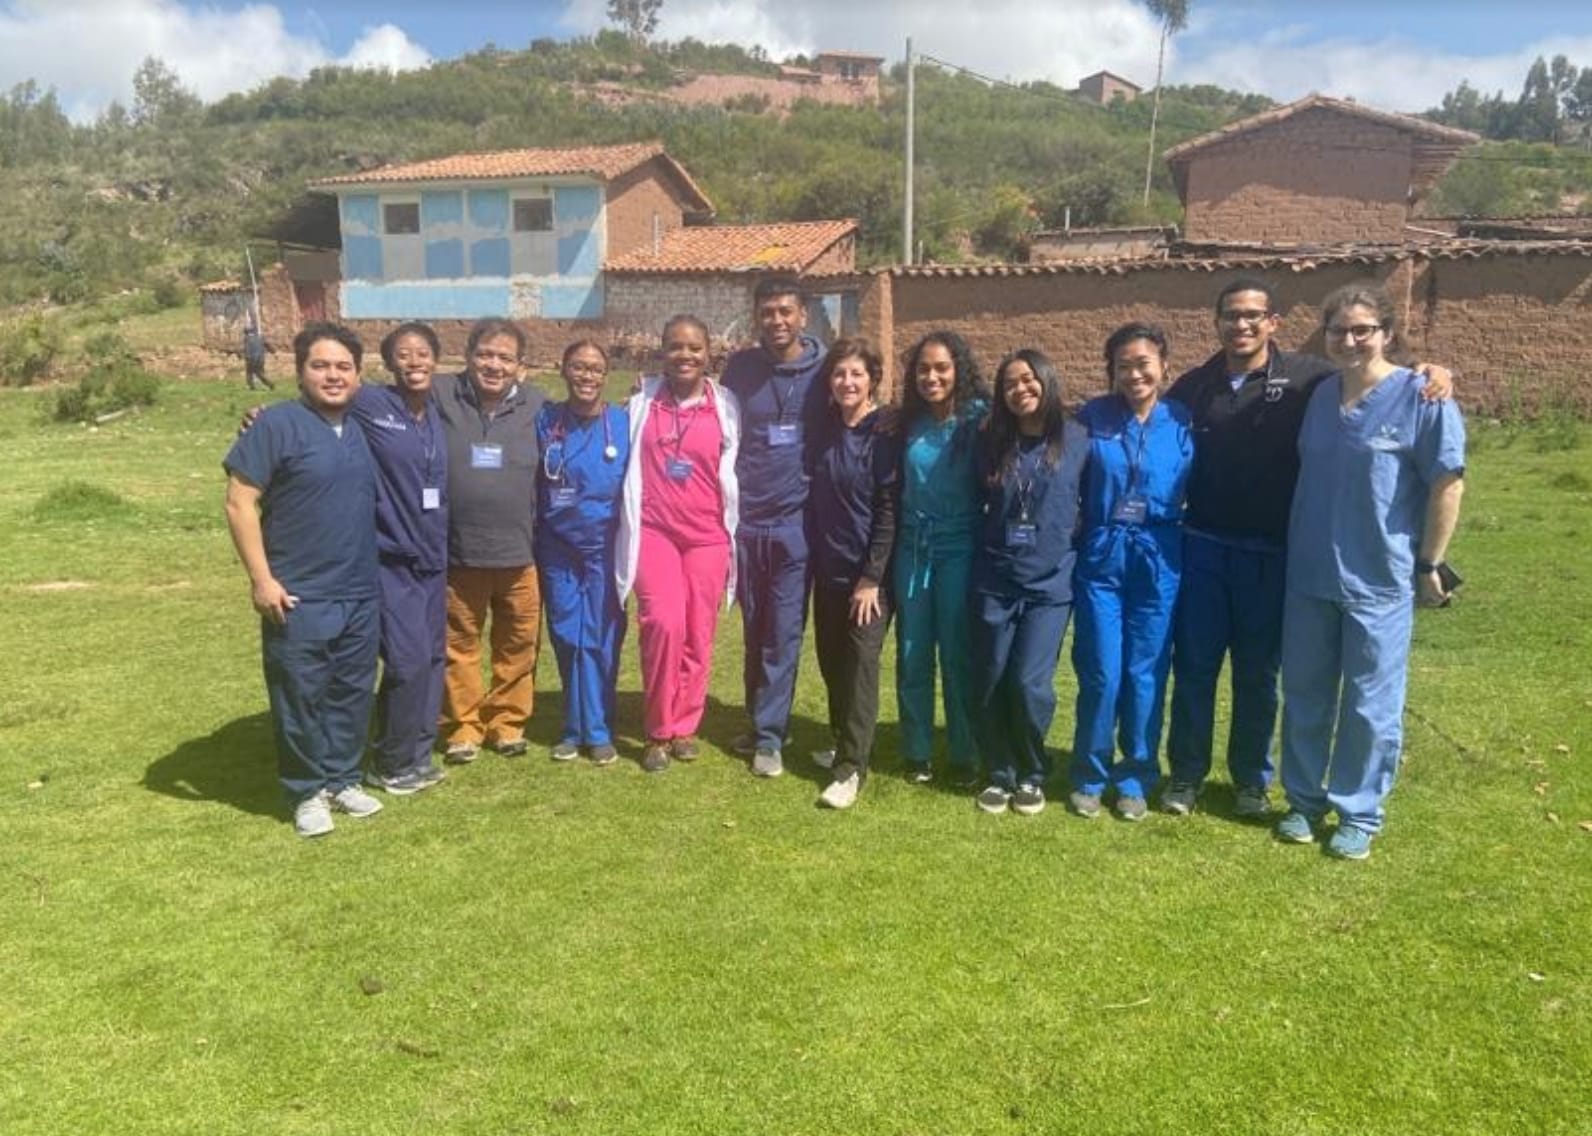 TouroCOM Harlem students with faculty in Peru on global medical mission.